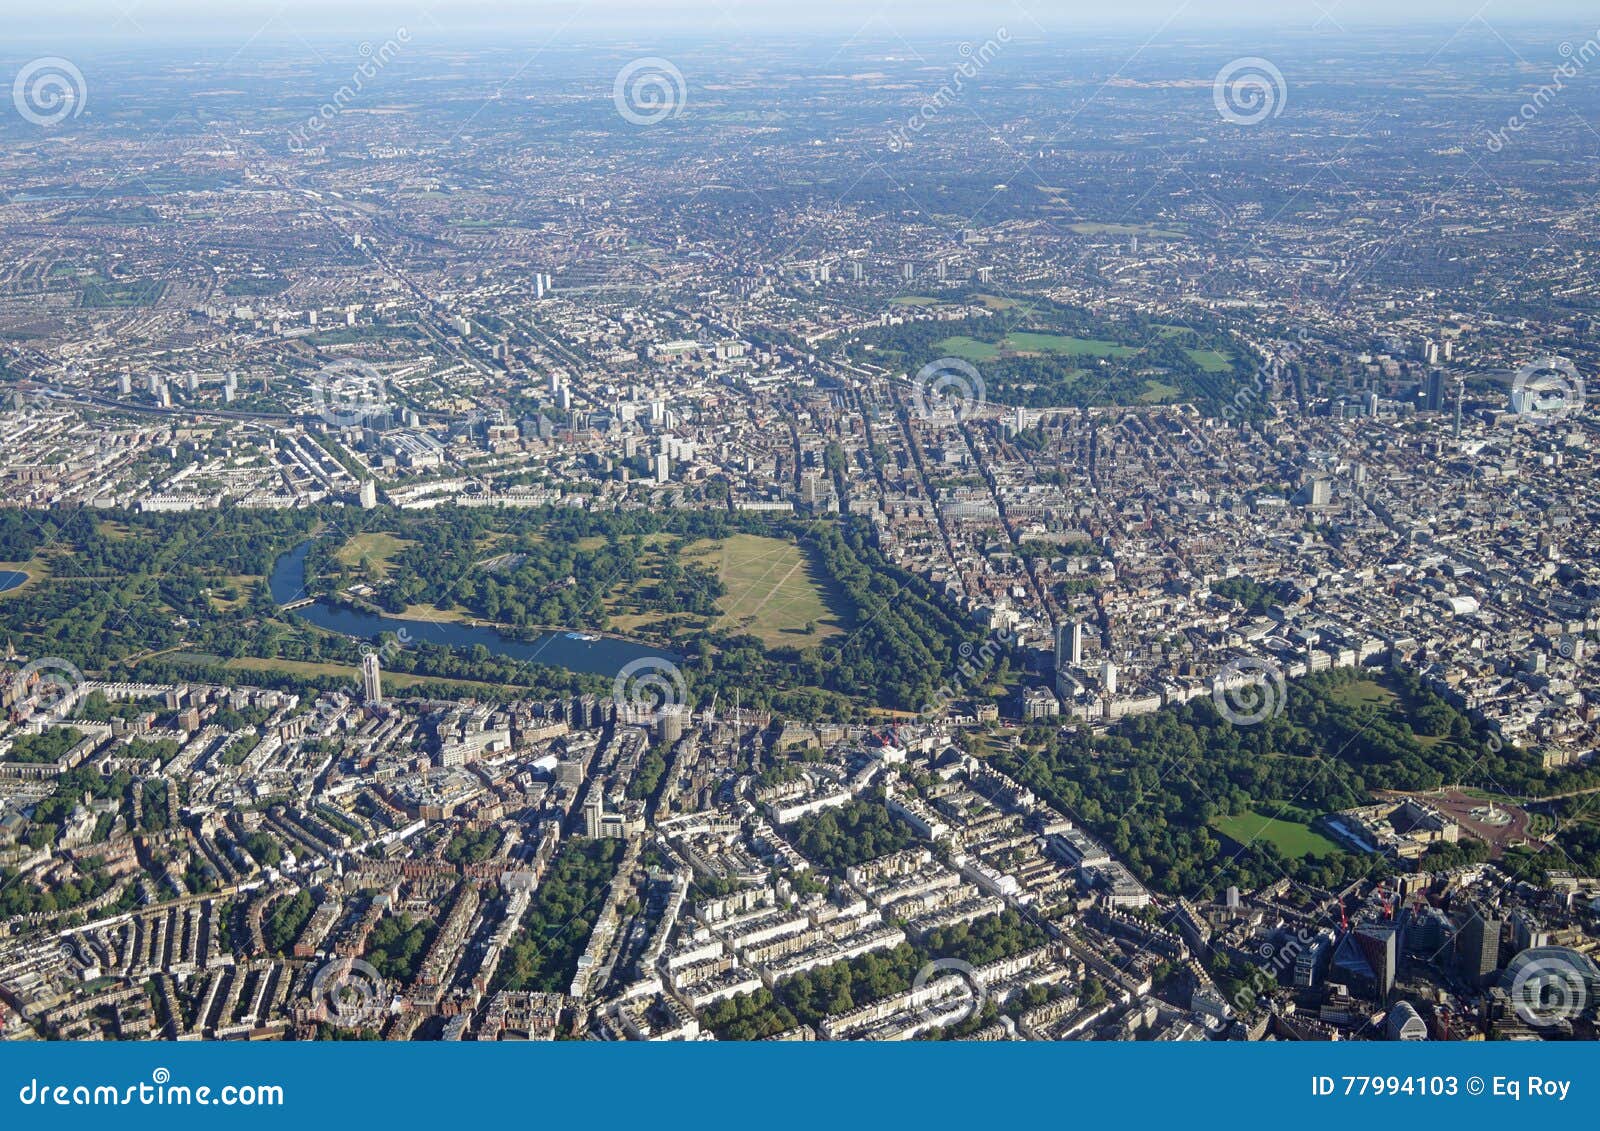 aerial view of central london and hyde park